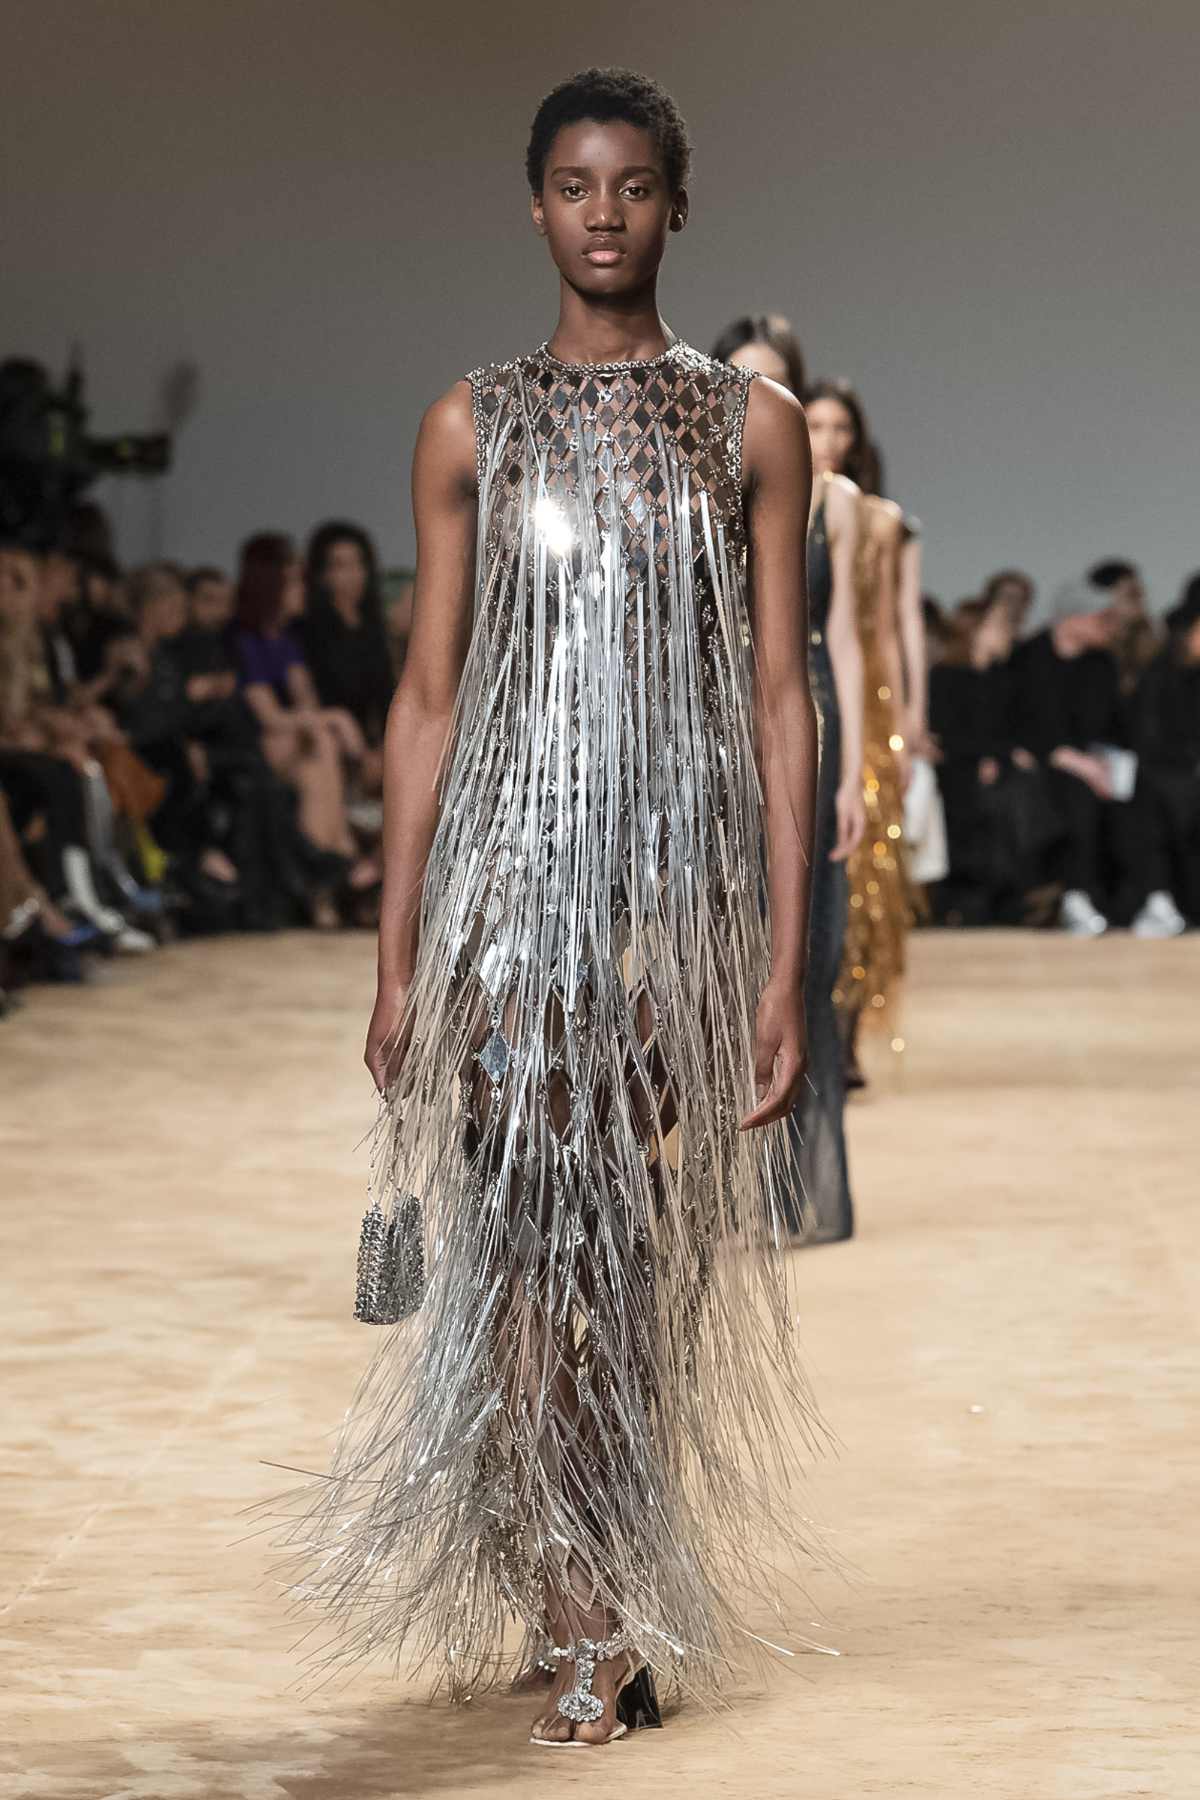 Paco Rabanne Presents Its New Fall-Winter 2023 Collection: Chasing Dreams